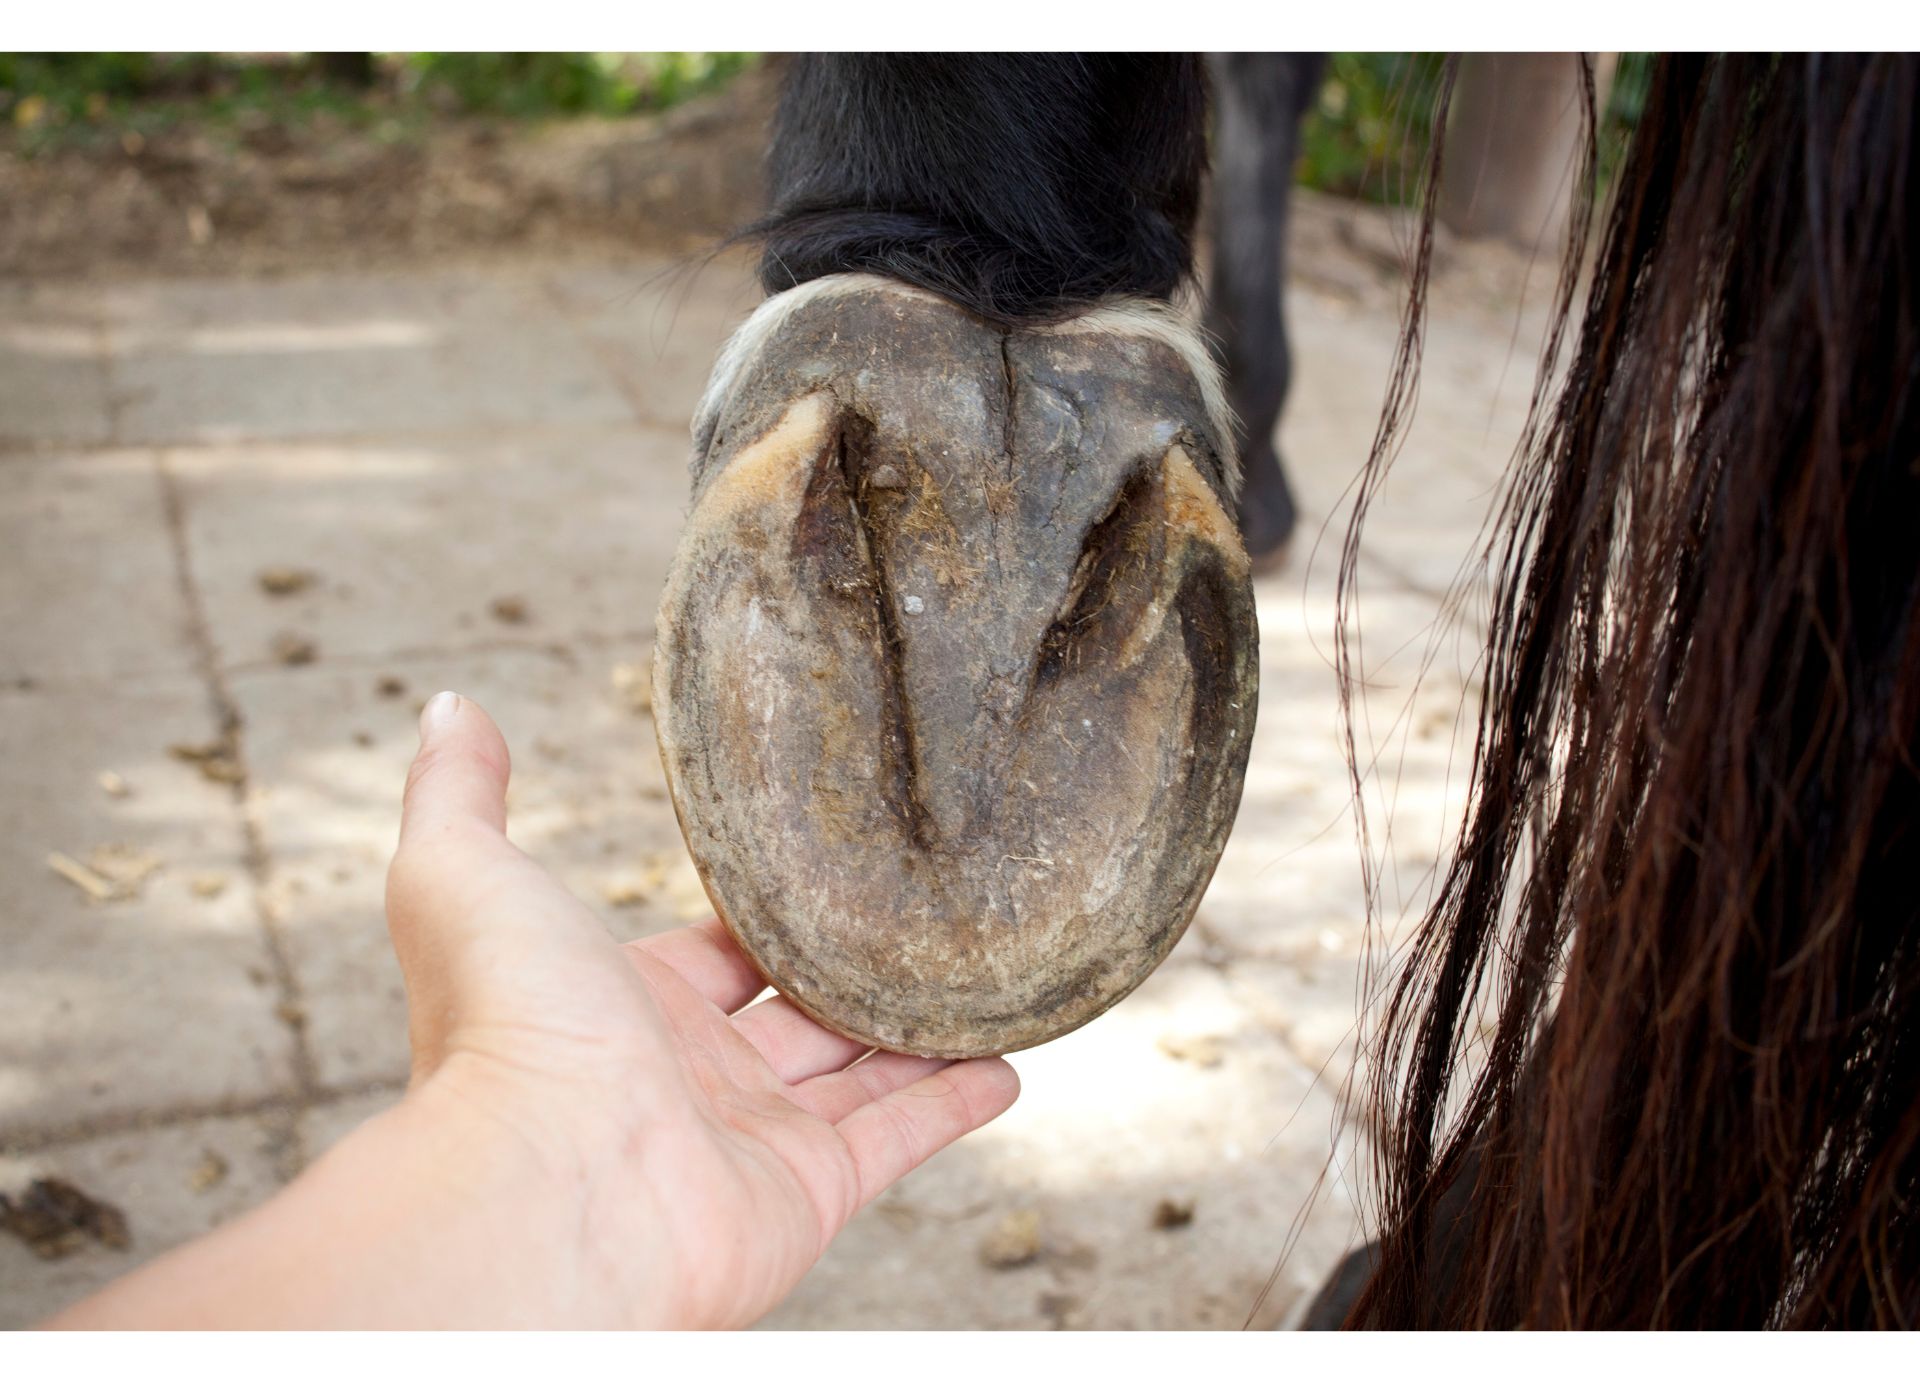 Barefoot hoof without shoe